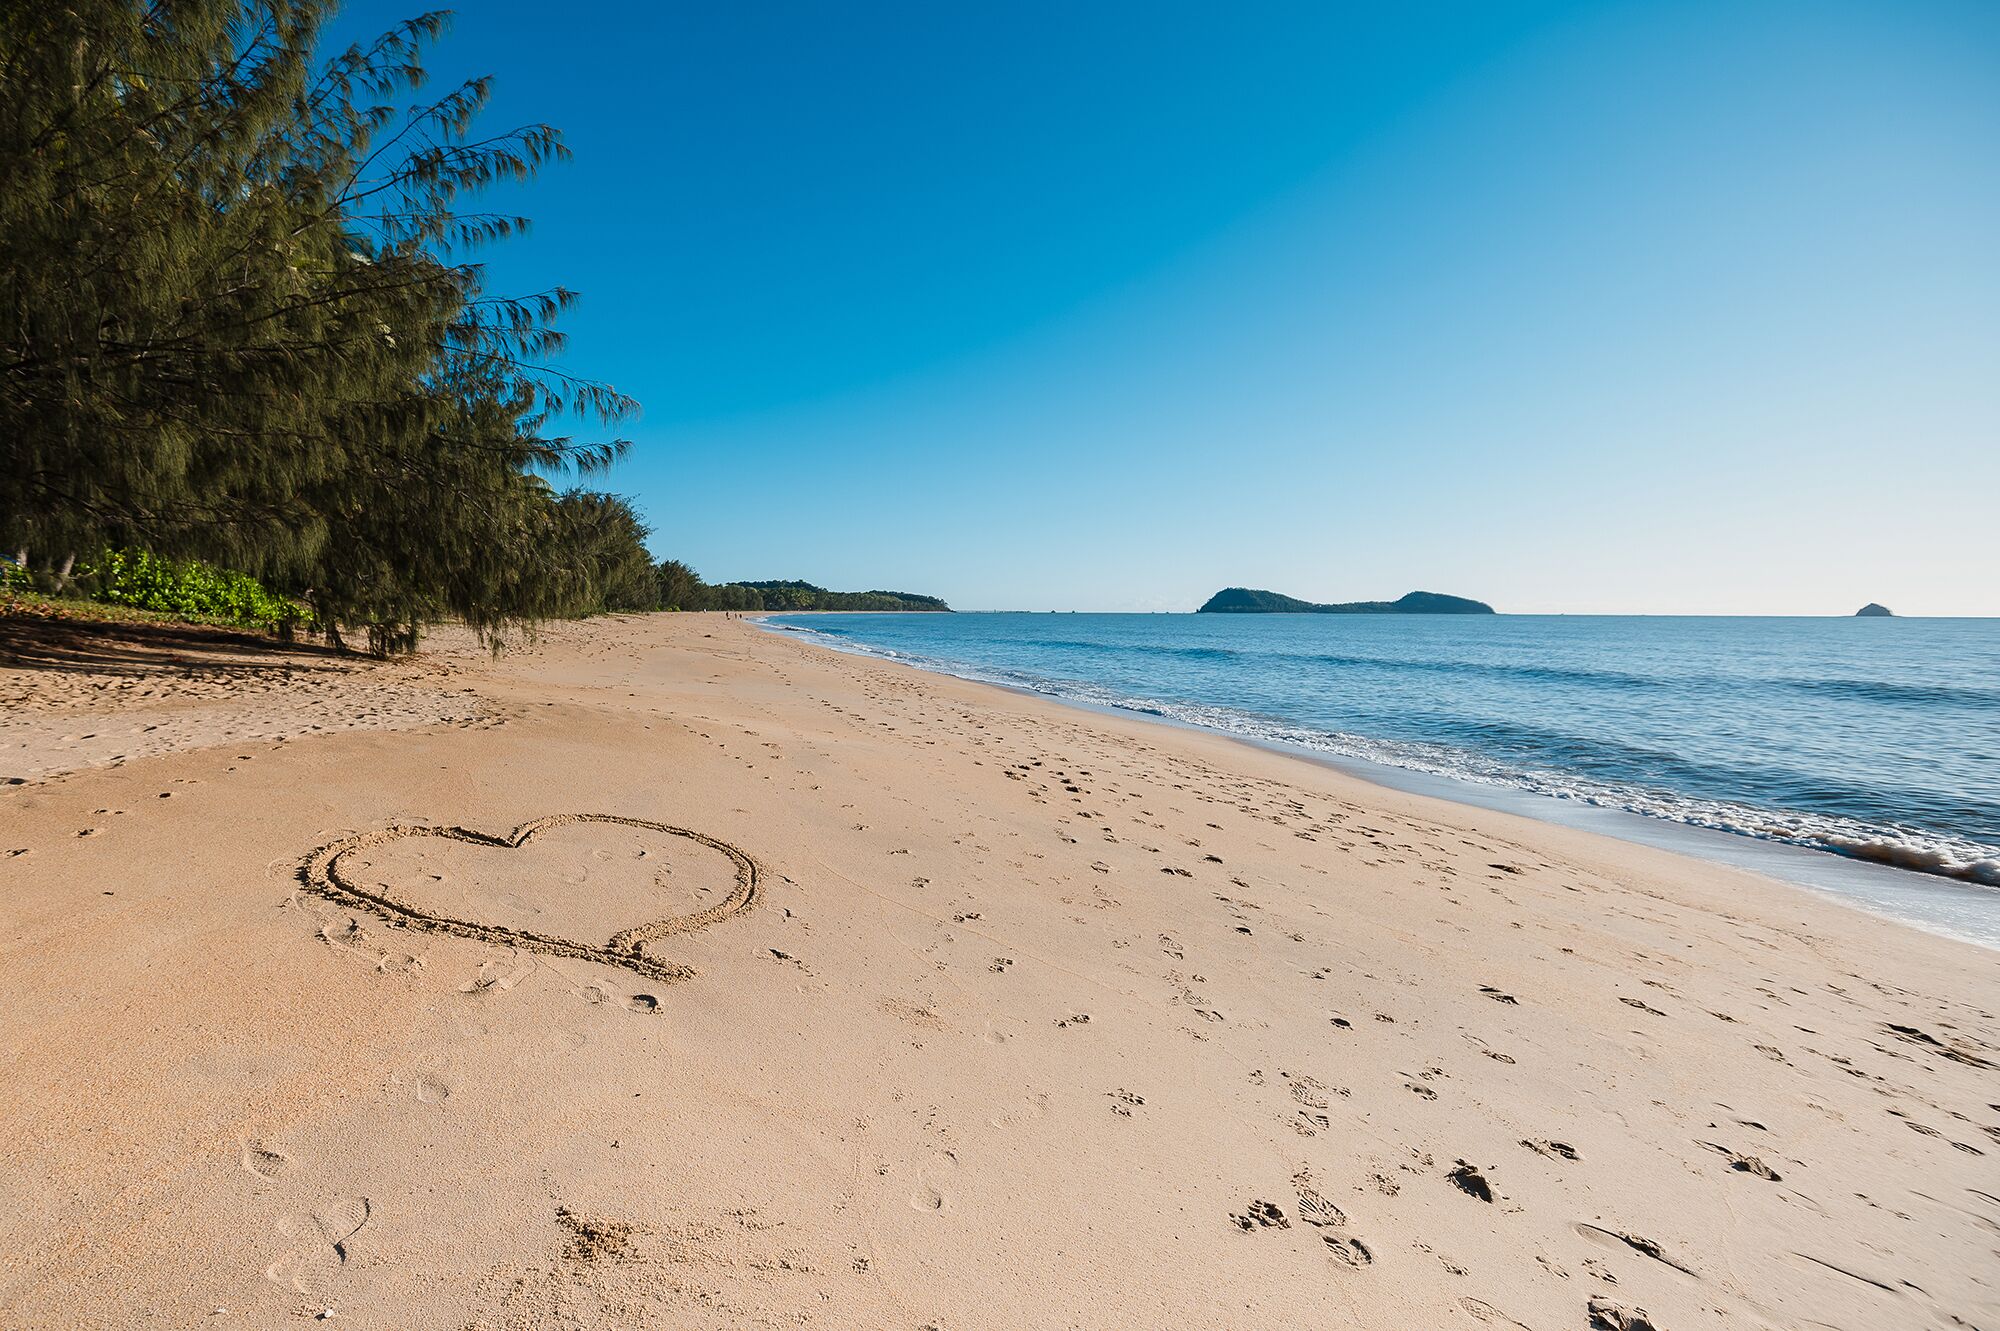 Experience the essence of the South Pacific in tropical Queensland, Australia.